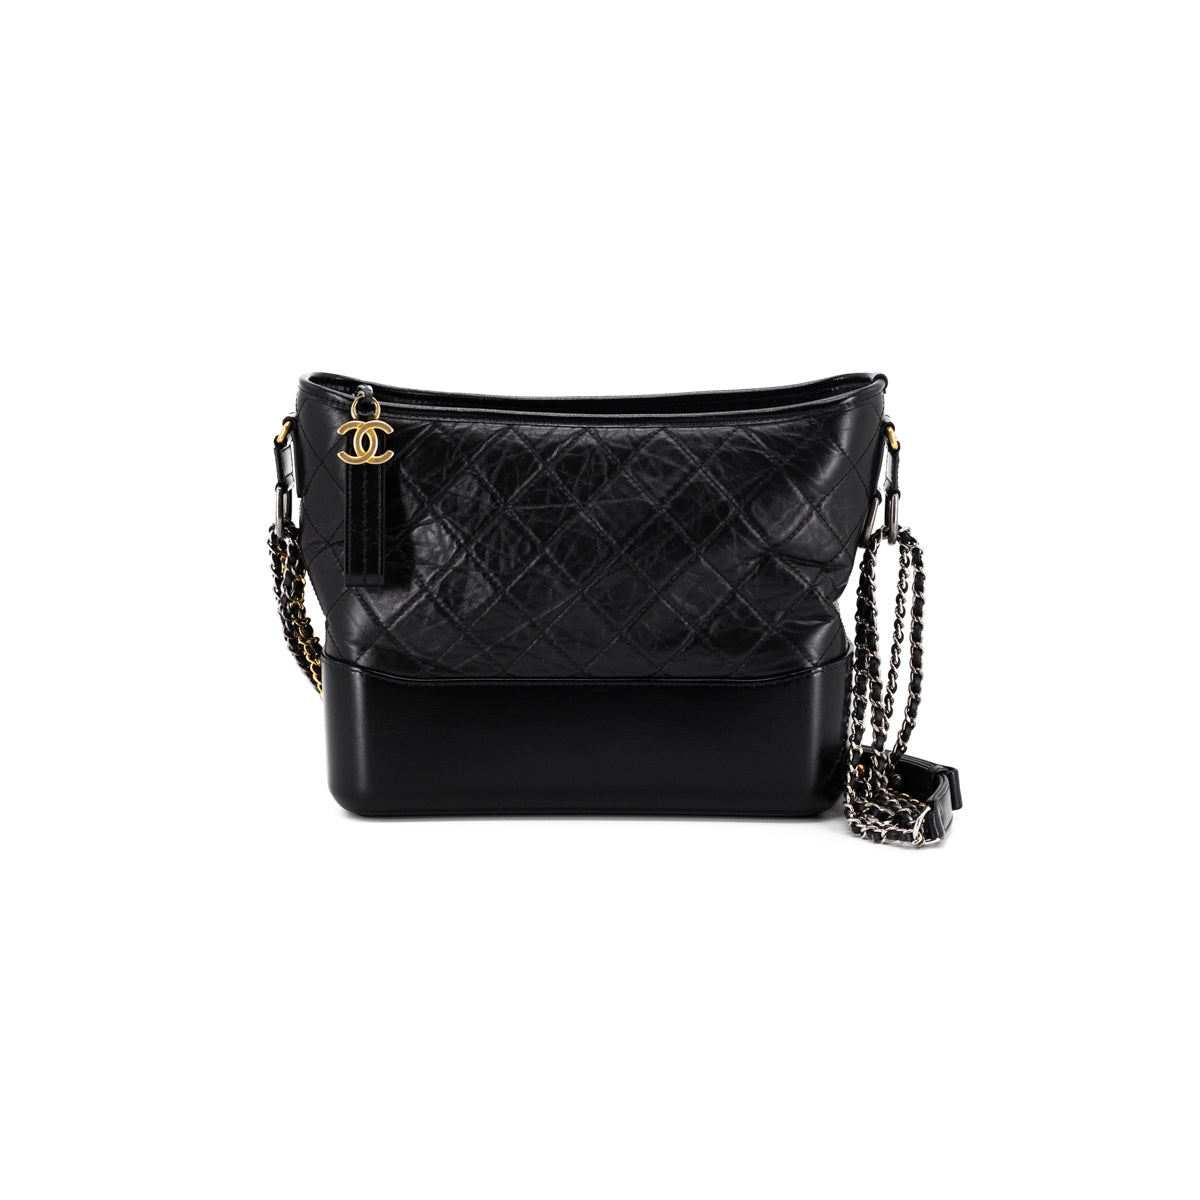 Pre-owned Chanel Gabrielle Hobo Bag Diamond Gabrielle Quilted Aged/smooth  Small Black